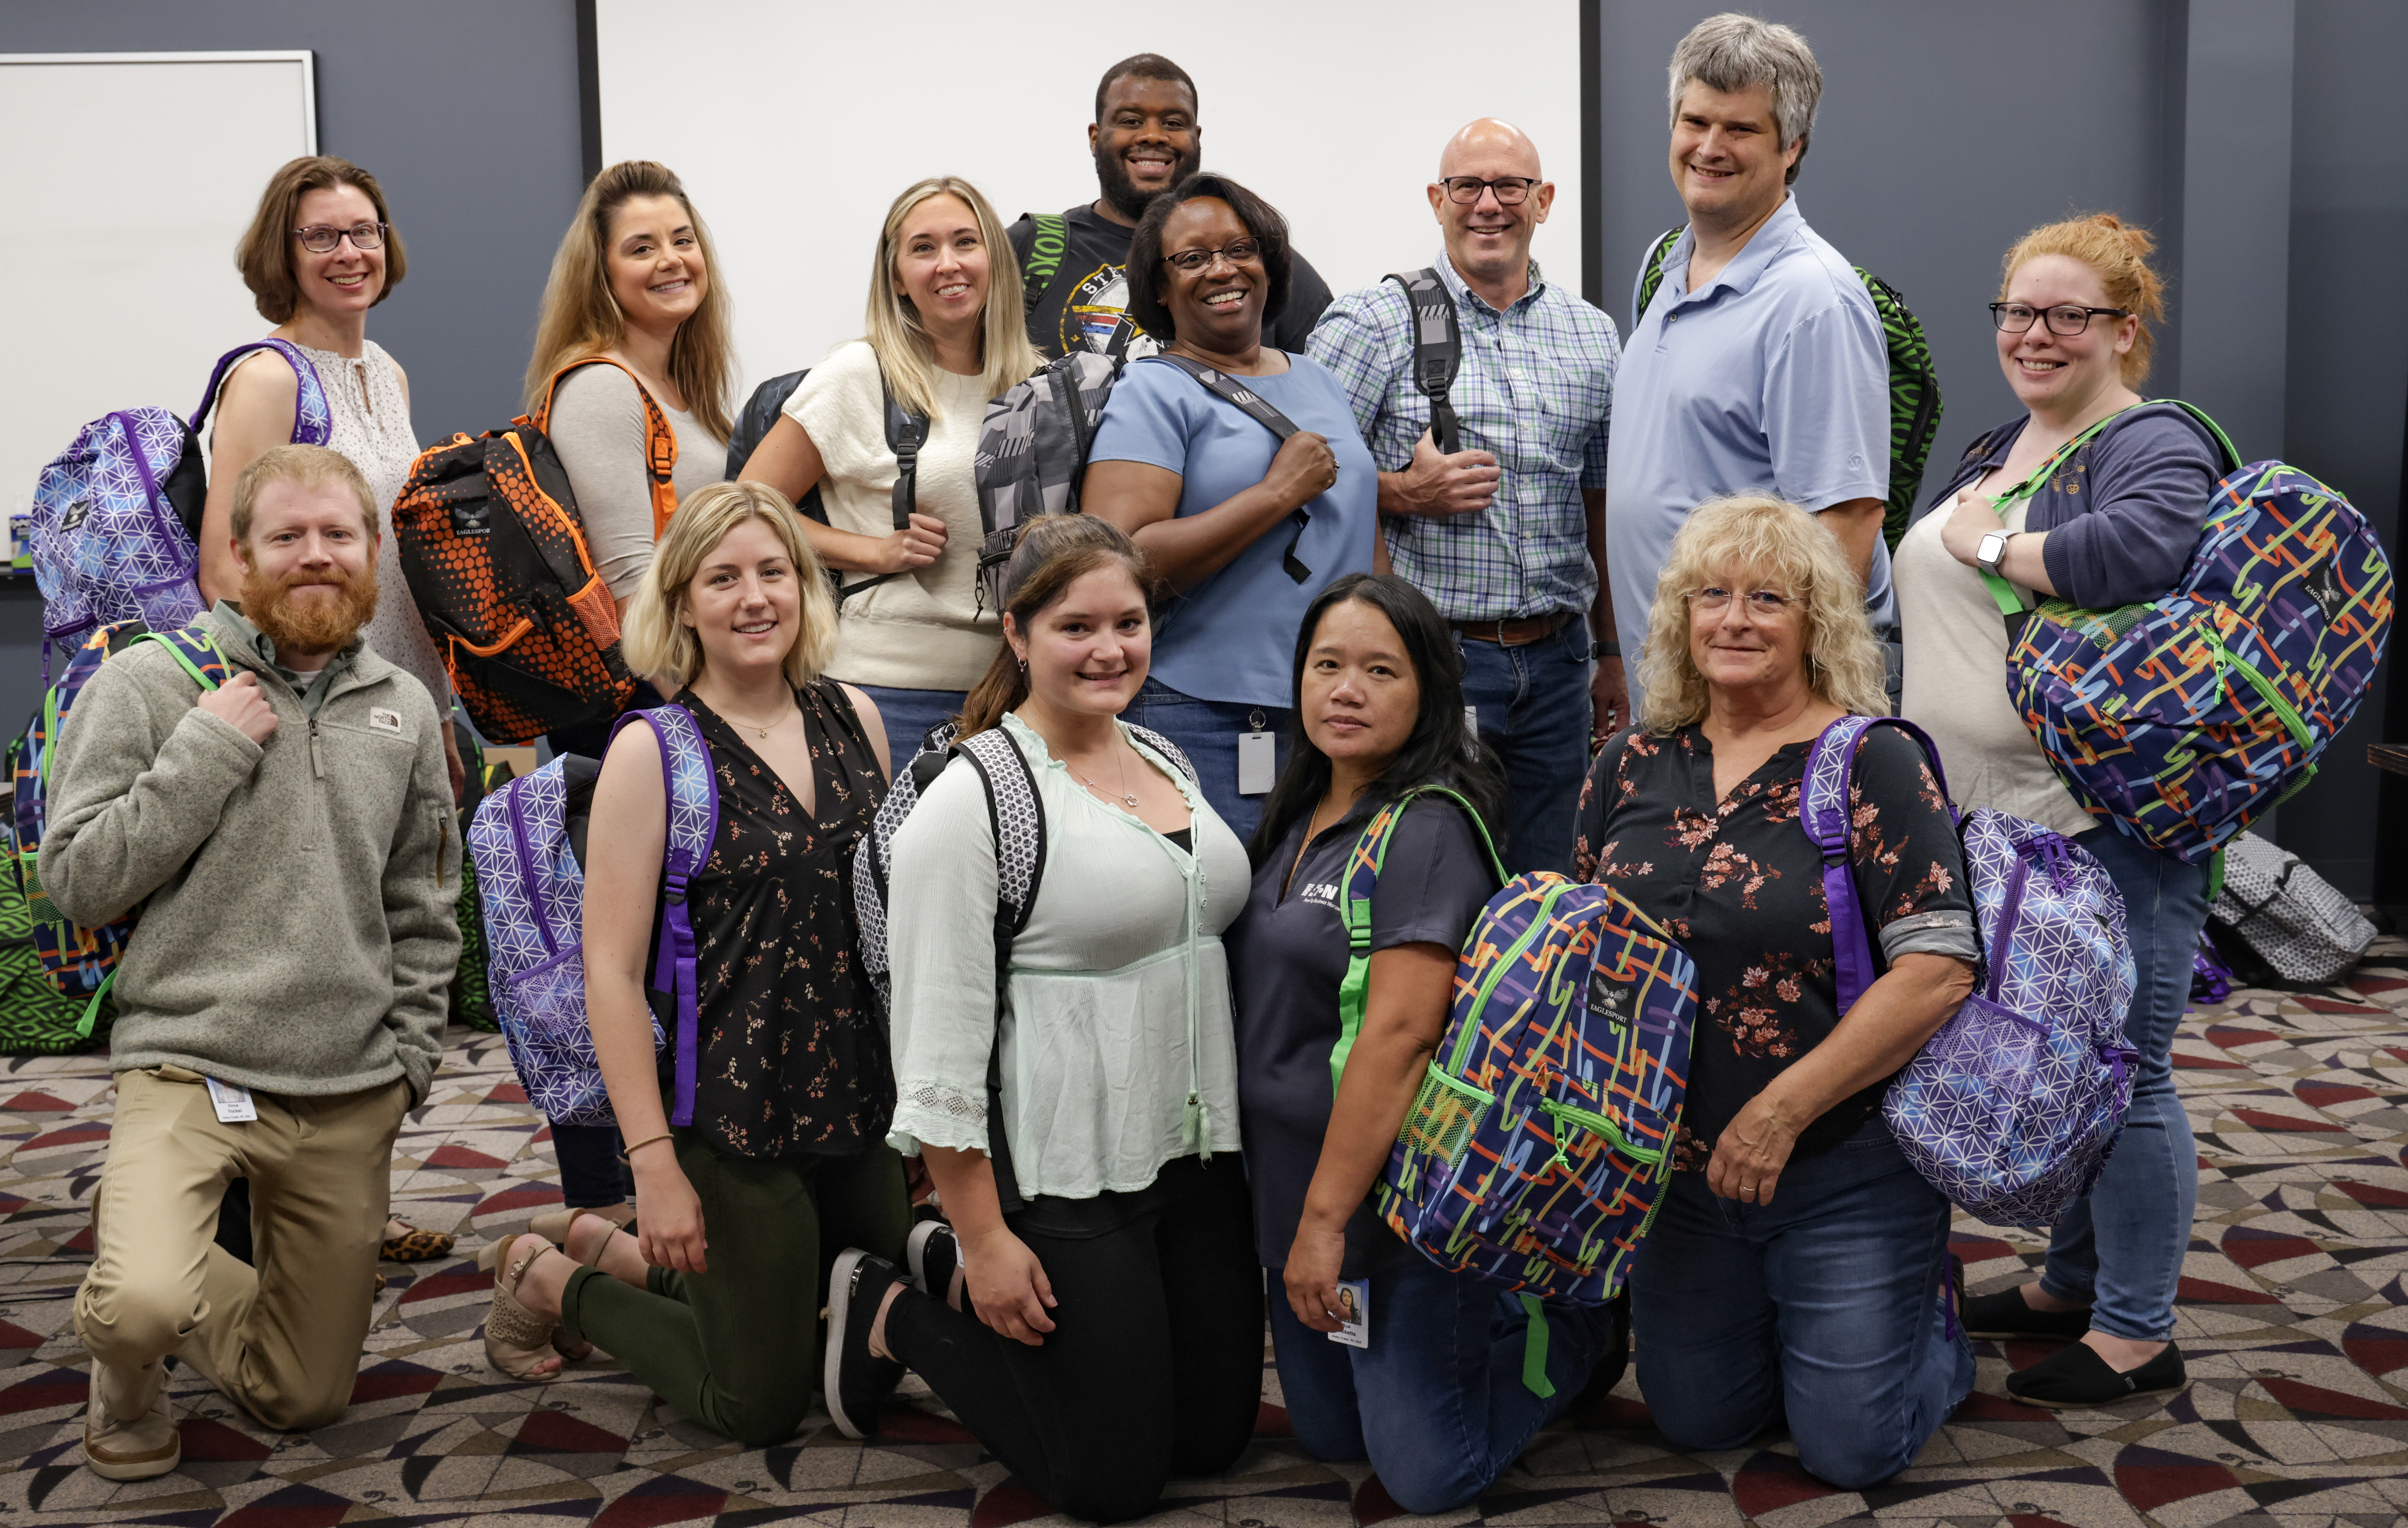 Eaton employees pose with the backpacks they have packed for the Annual School Supply drive